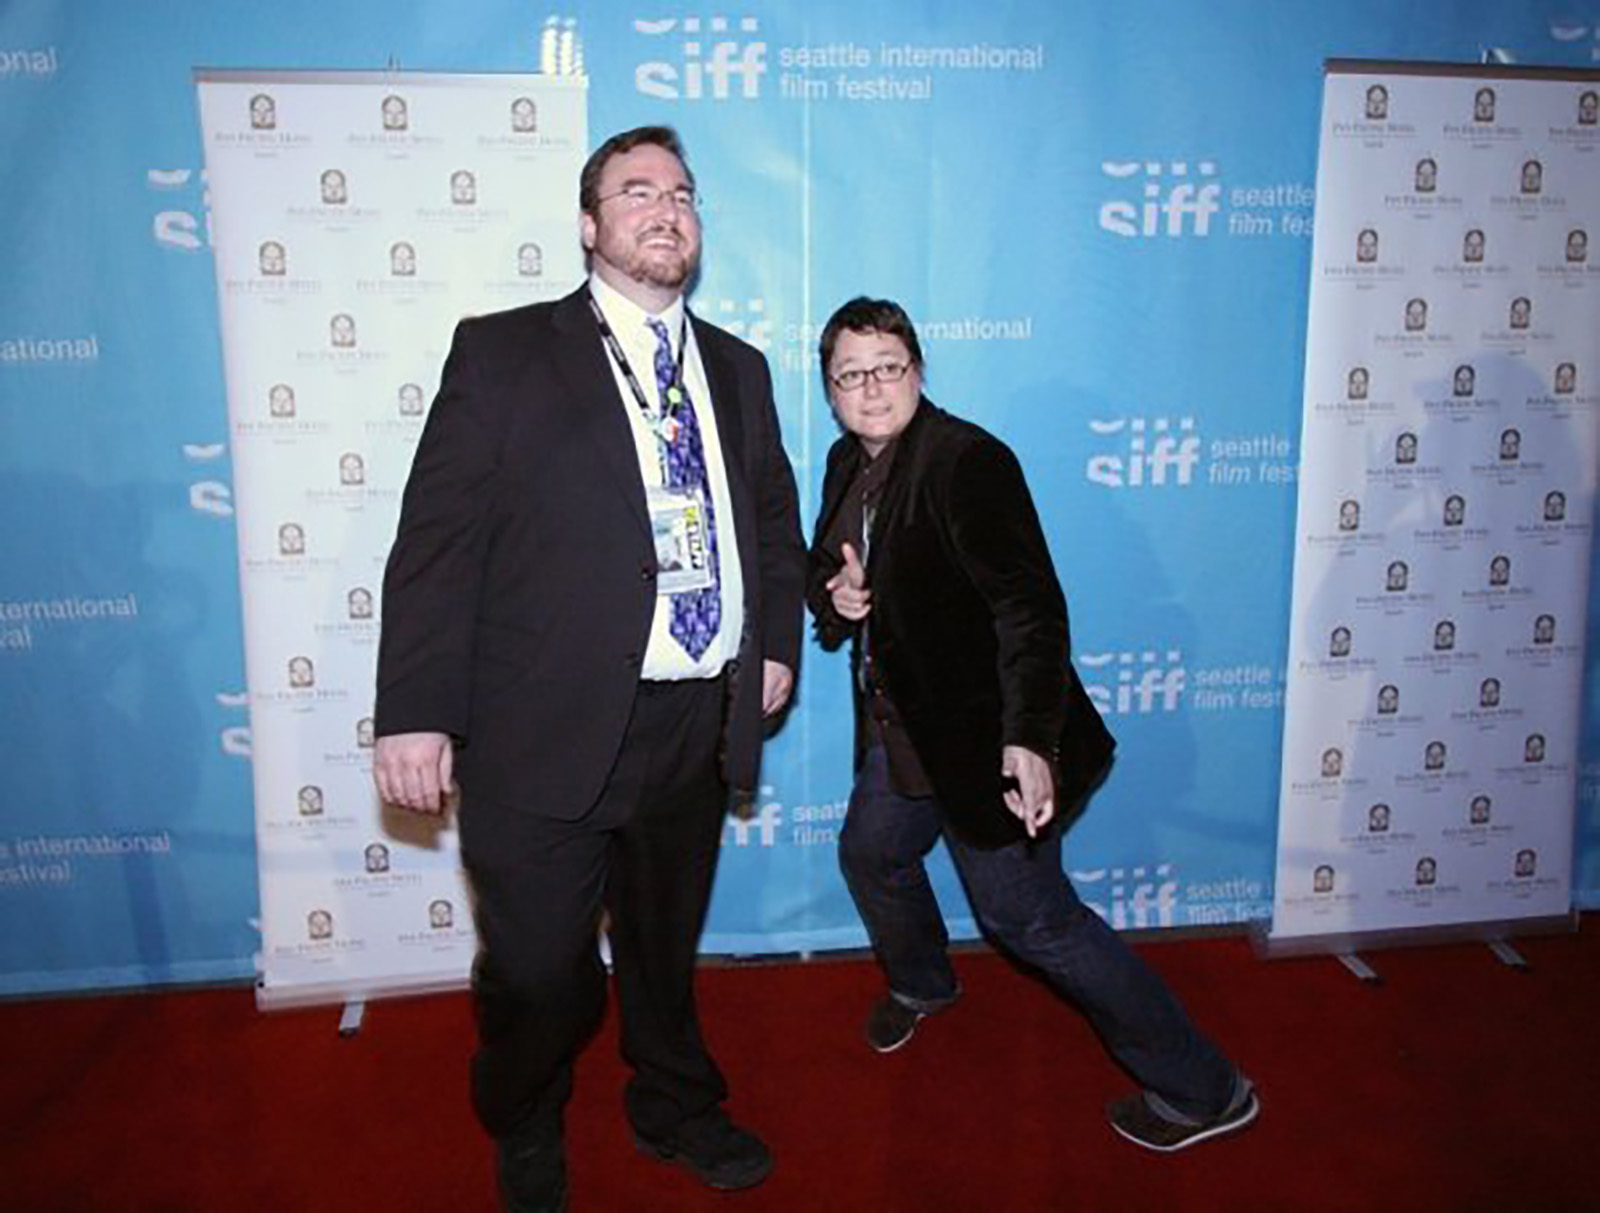 Programmers, Dustin Kaspar and Beth Barrett (current Artistic Director) strike a pose on the red carpet at Closing Night of the 35th Seattle International Film Festival